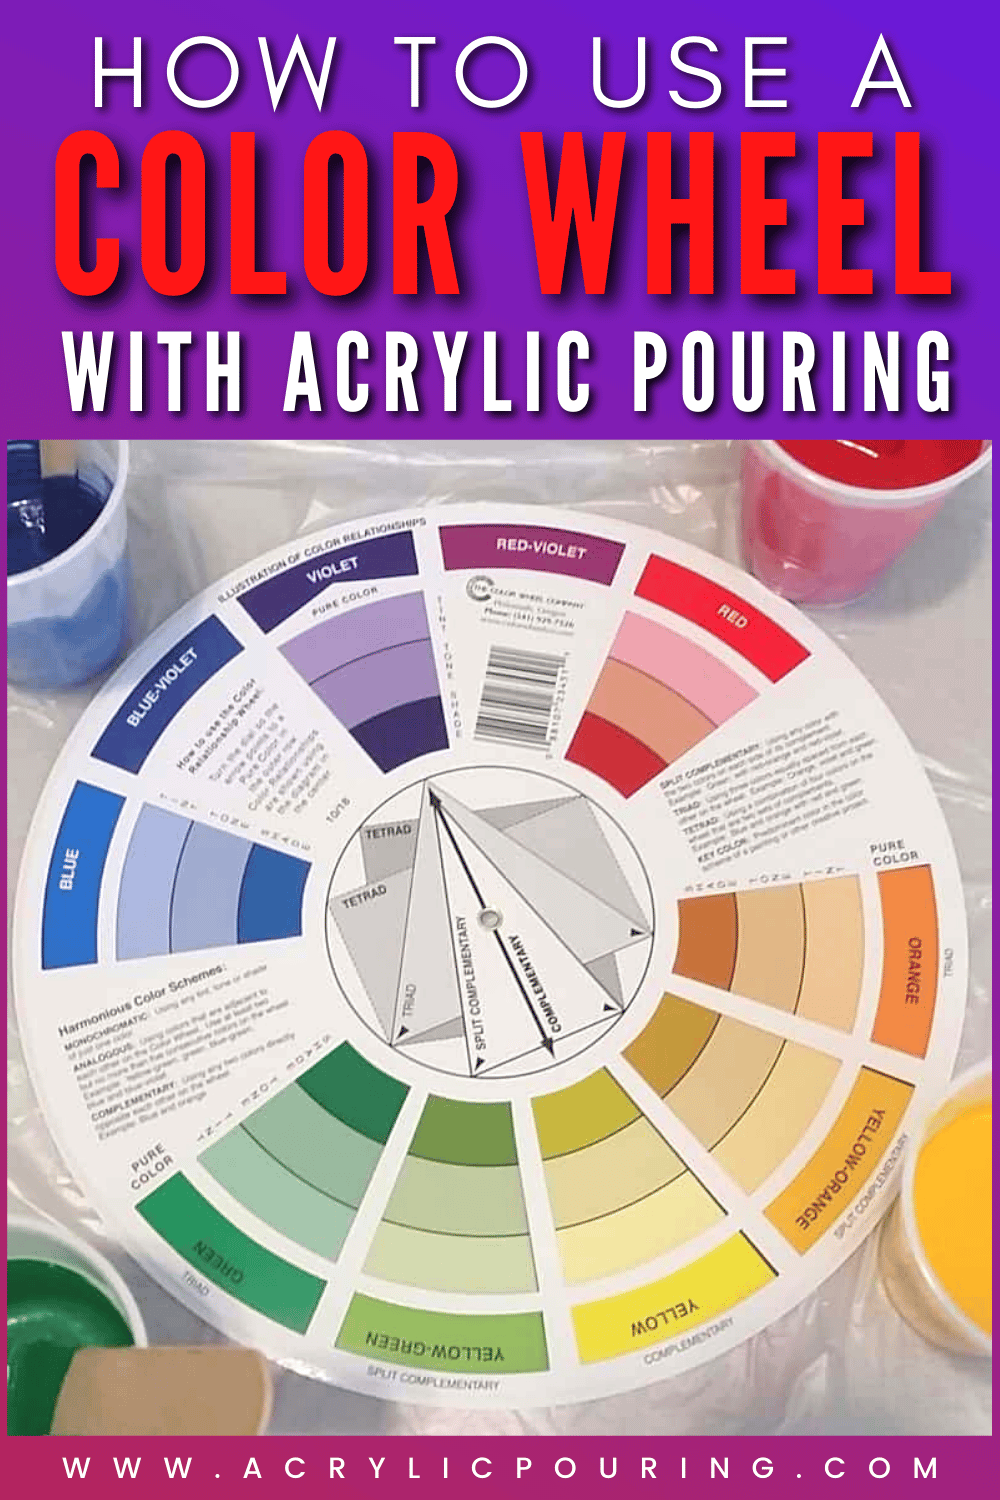 Understanding color theory is essential for any artist! We want to see what you do with your color theory knowledge. Show us your primary pours, your complementary color pours, and more on the Acrylic Pouring Facebook group.